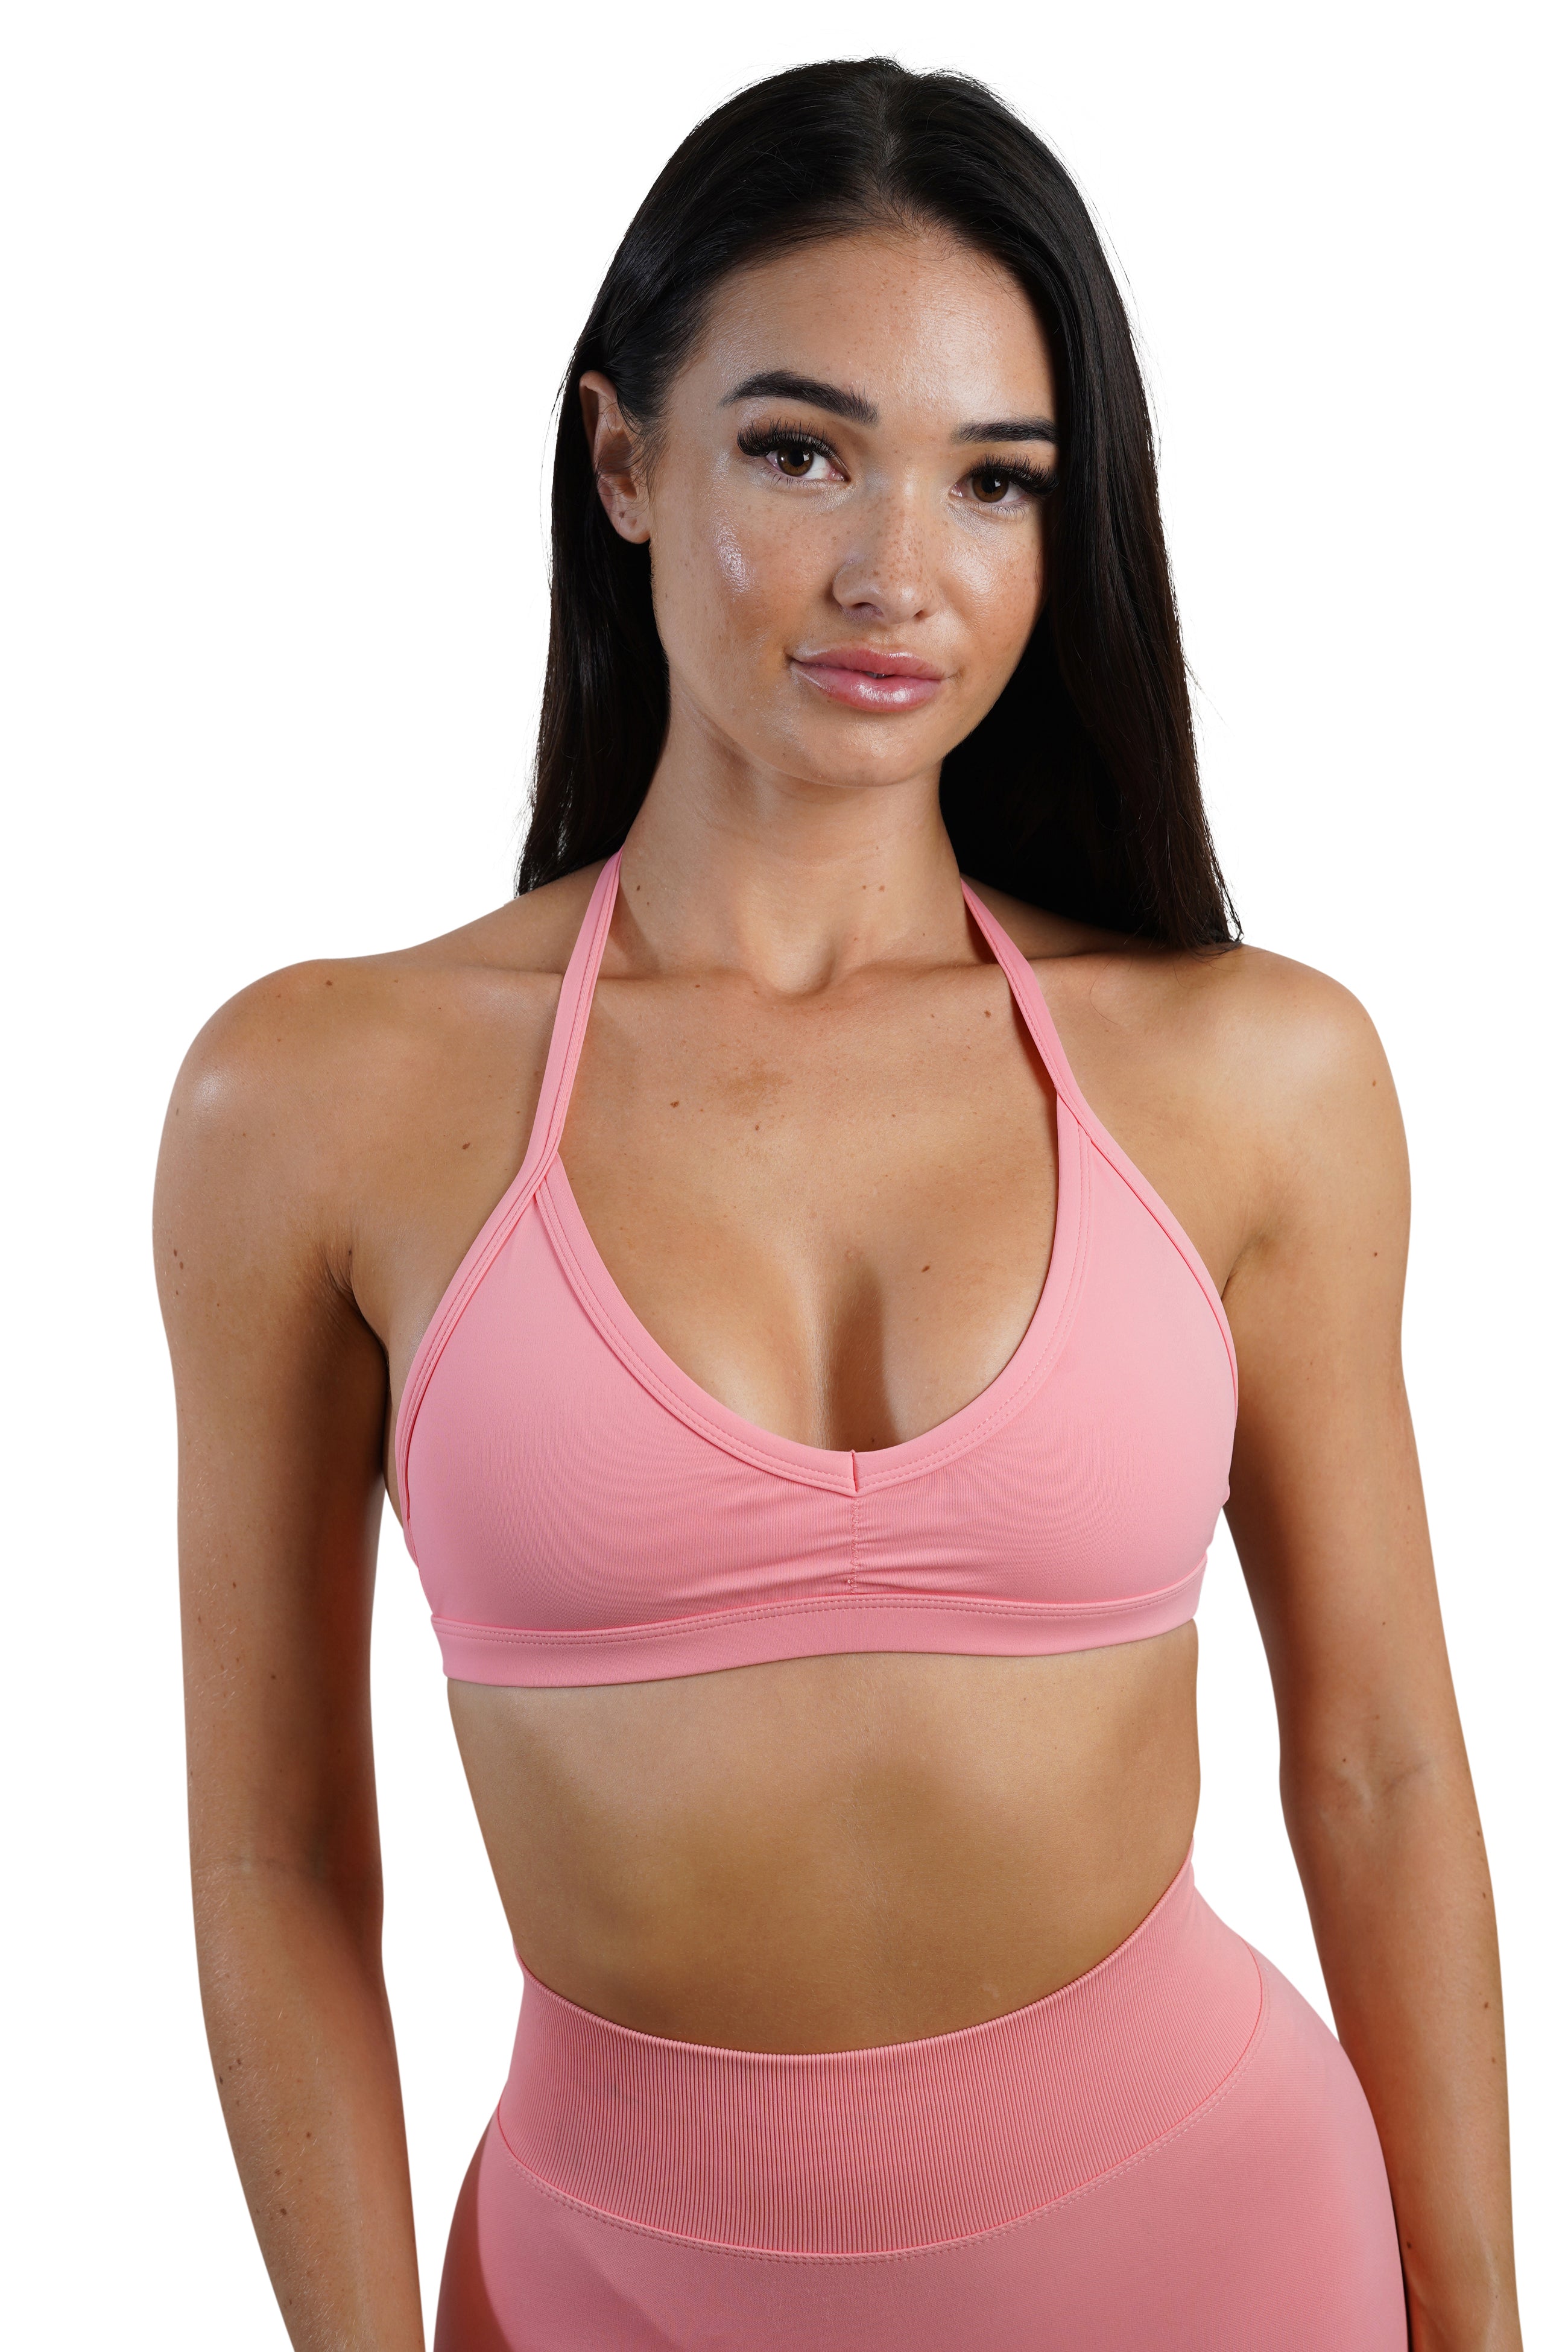 Mindset Cut Out Define Luxe Sports Bra in Warm Taupe